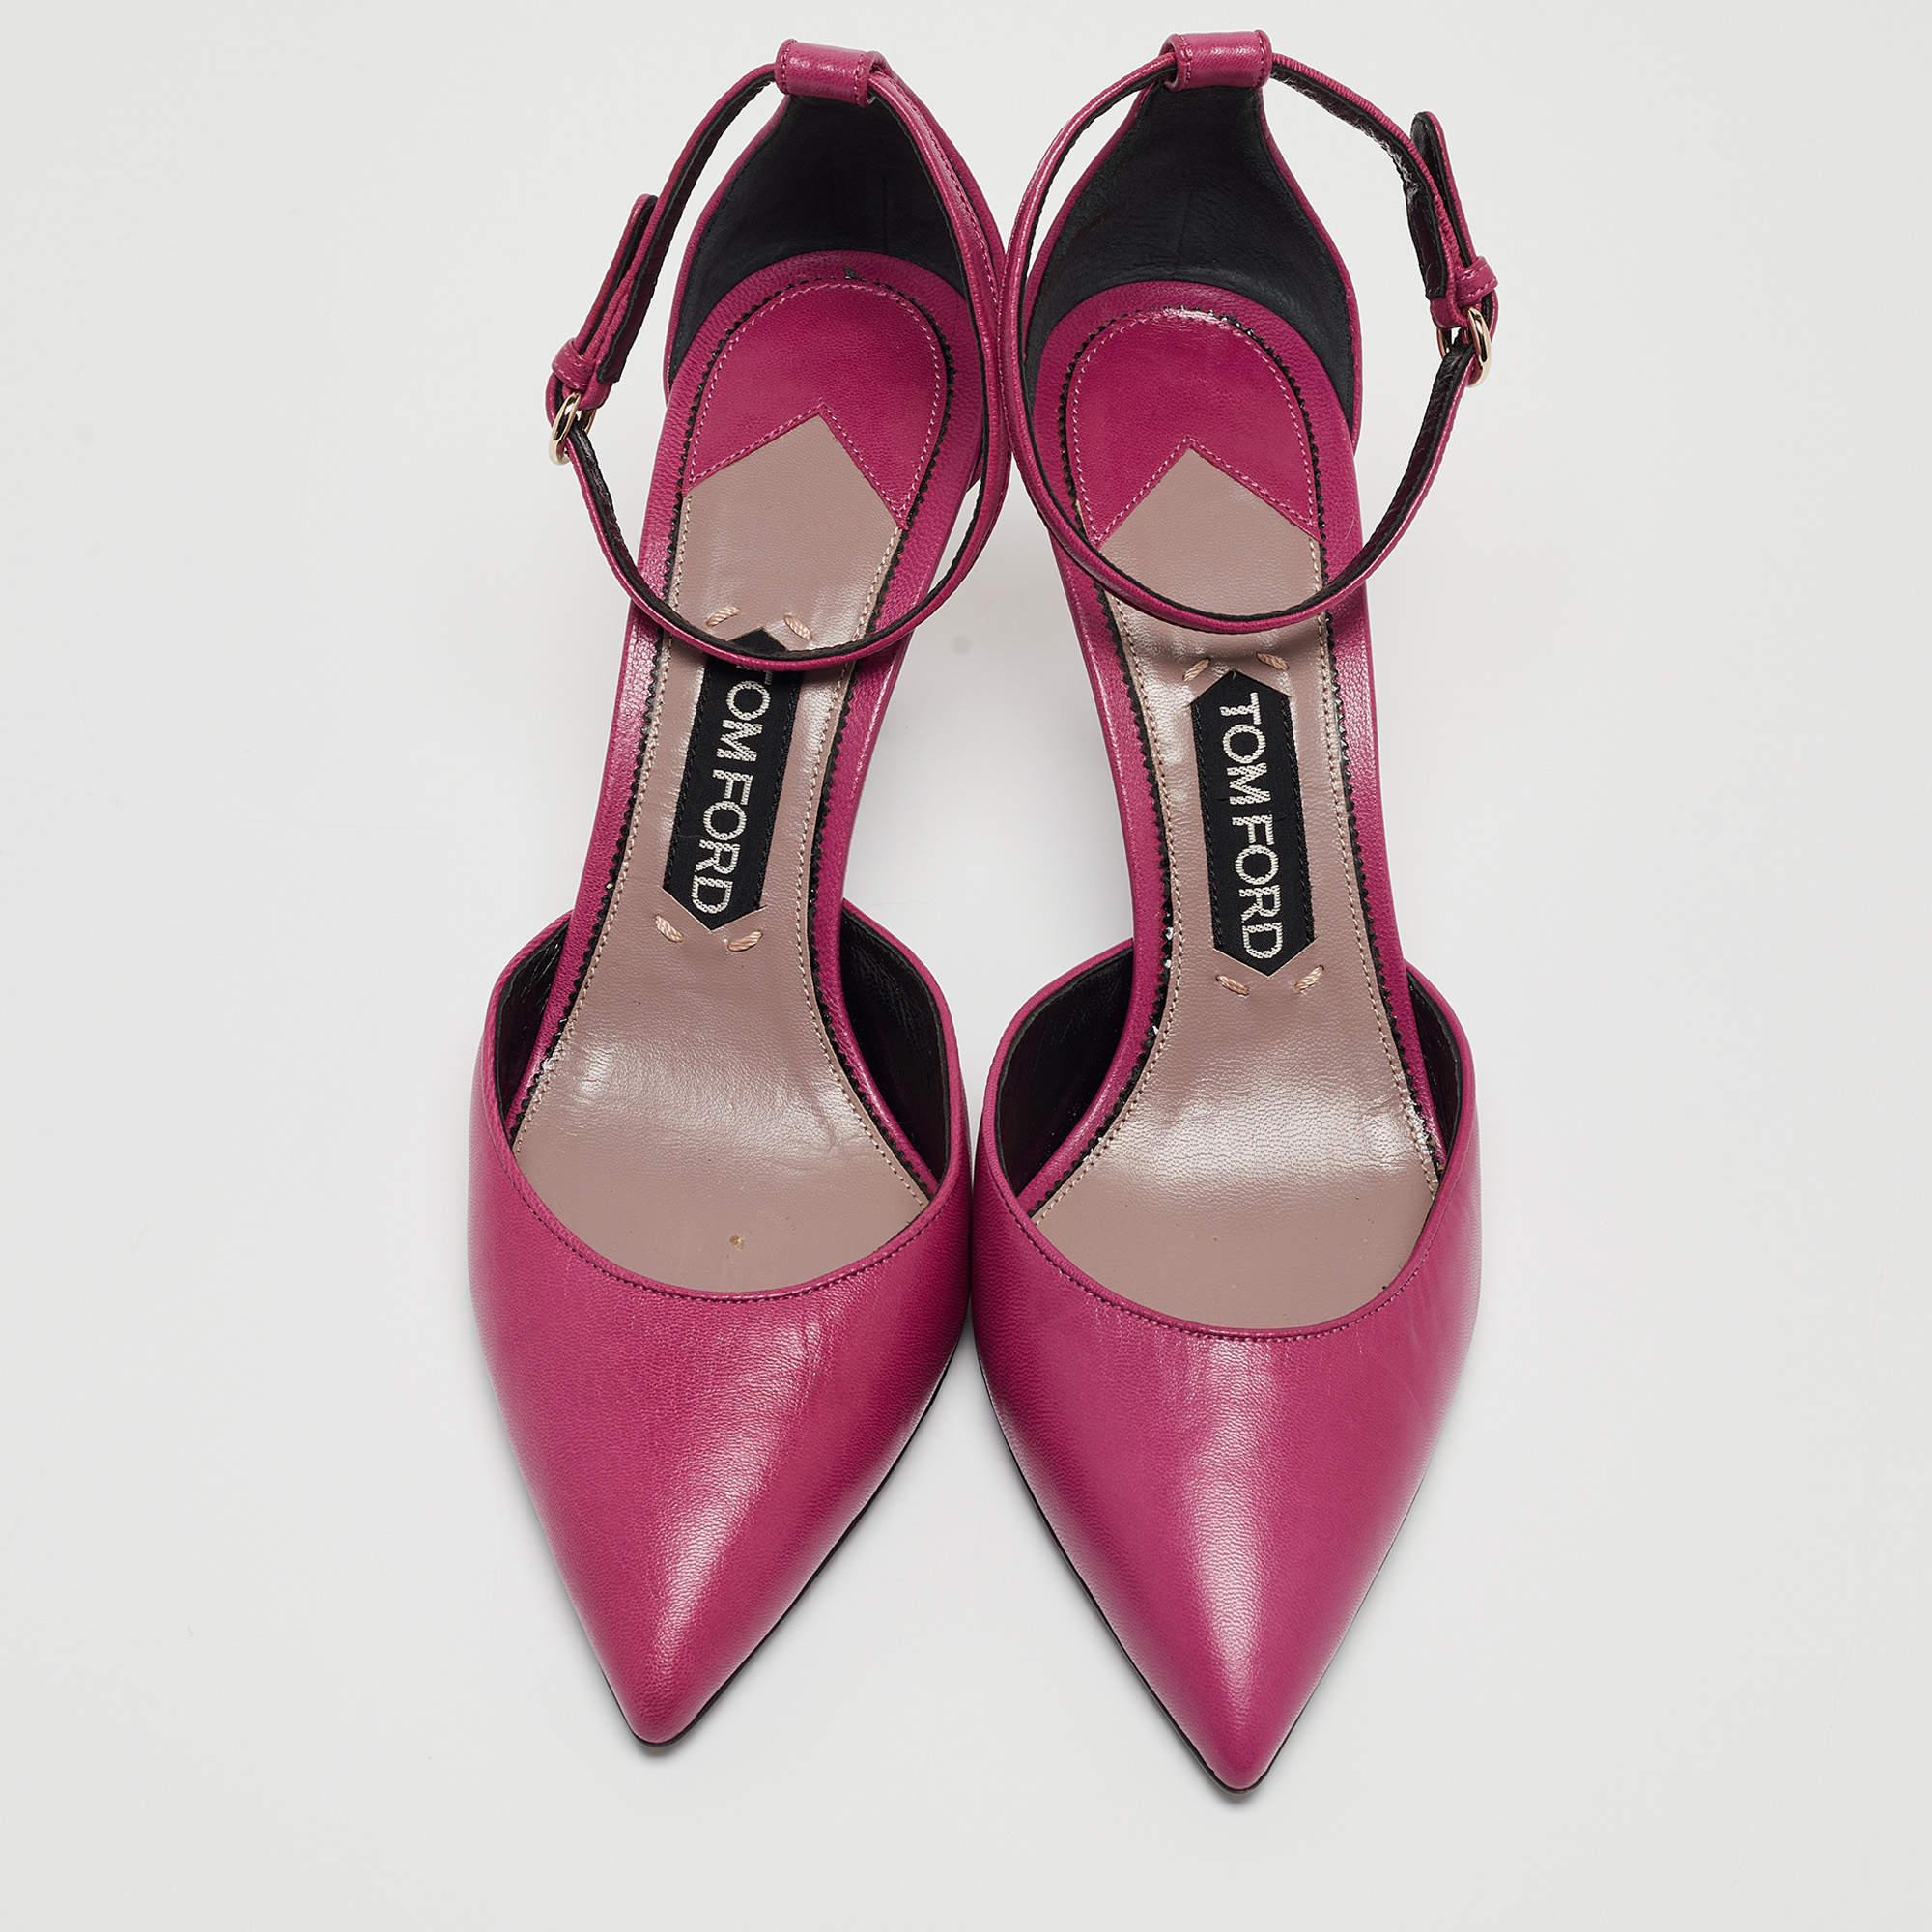 Exhibit an elegant style with this pair of pumps. These elegant shoes are crafted from quality materials. They are set on durable soles and sleek heels.

Includes: Original Dustbag, Extra Heel Tips

